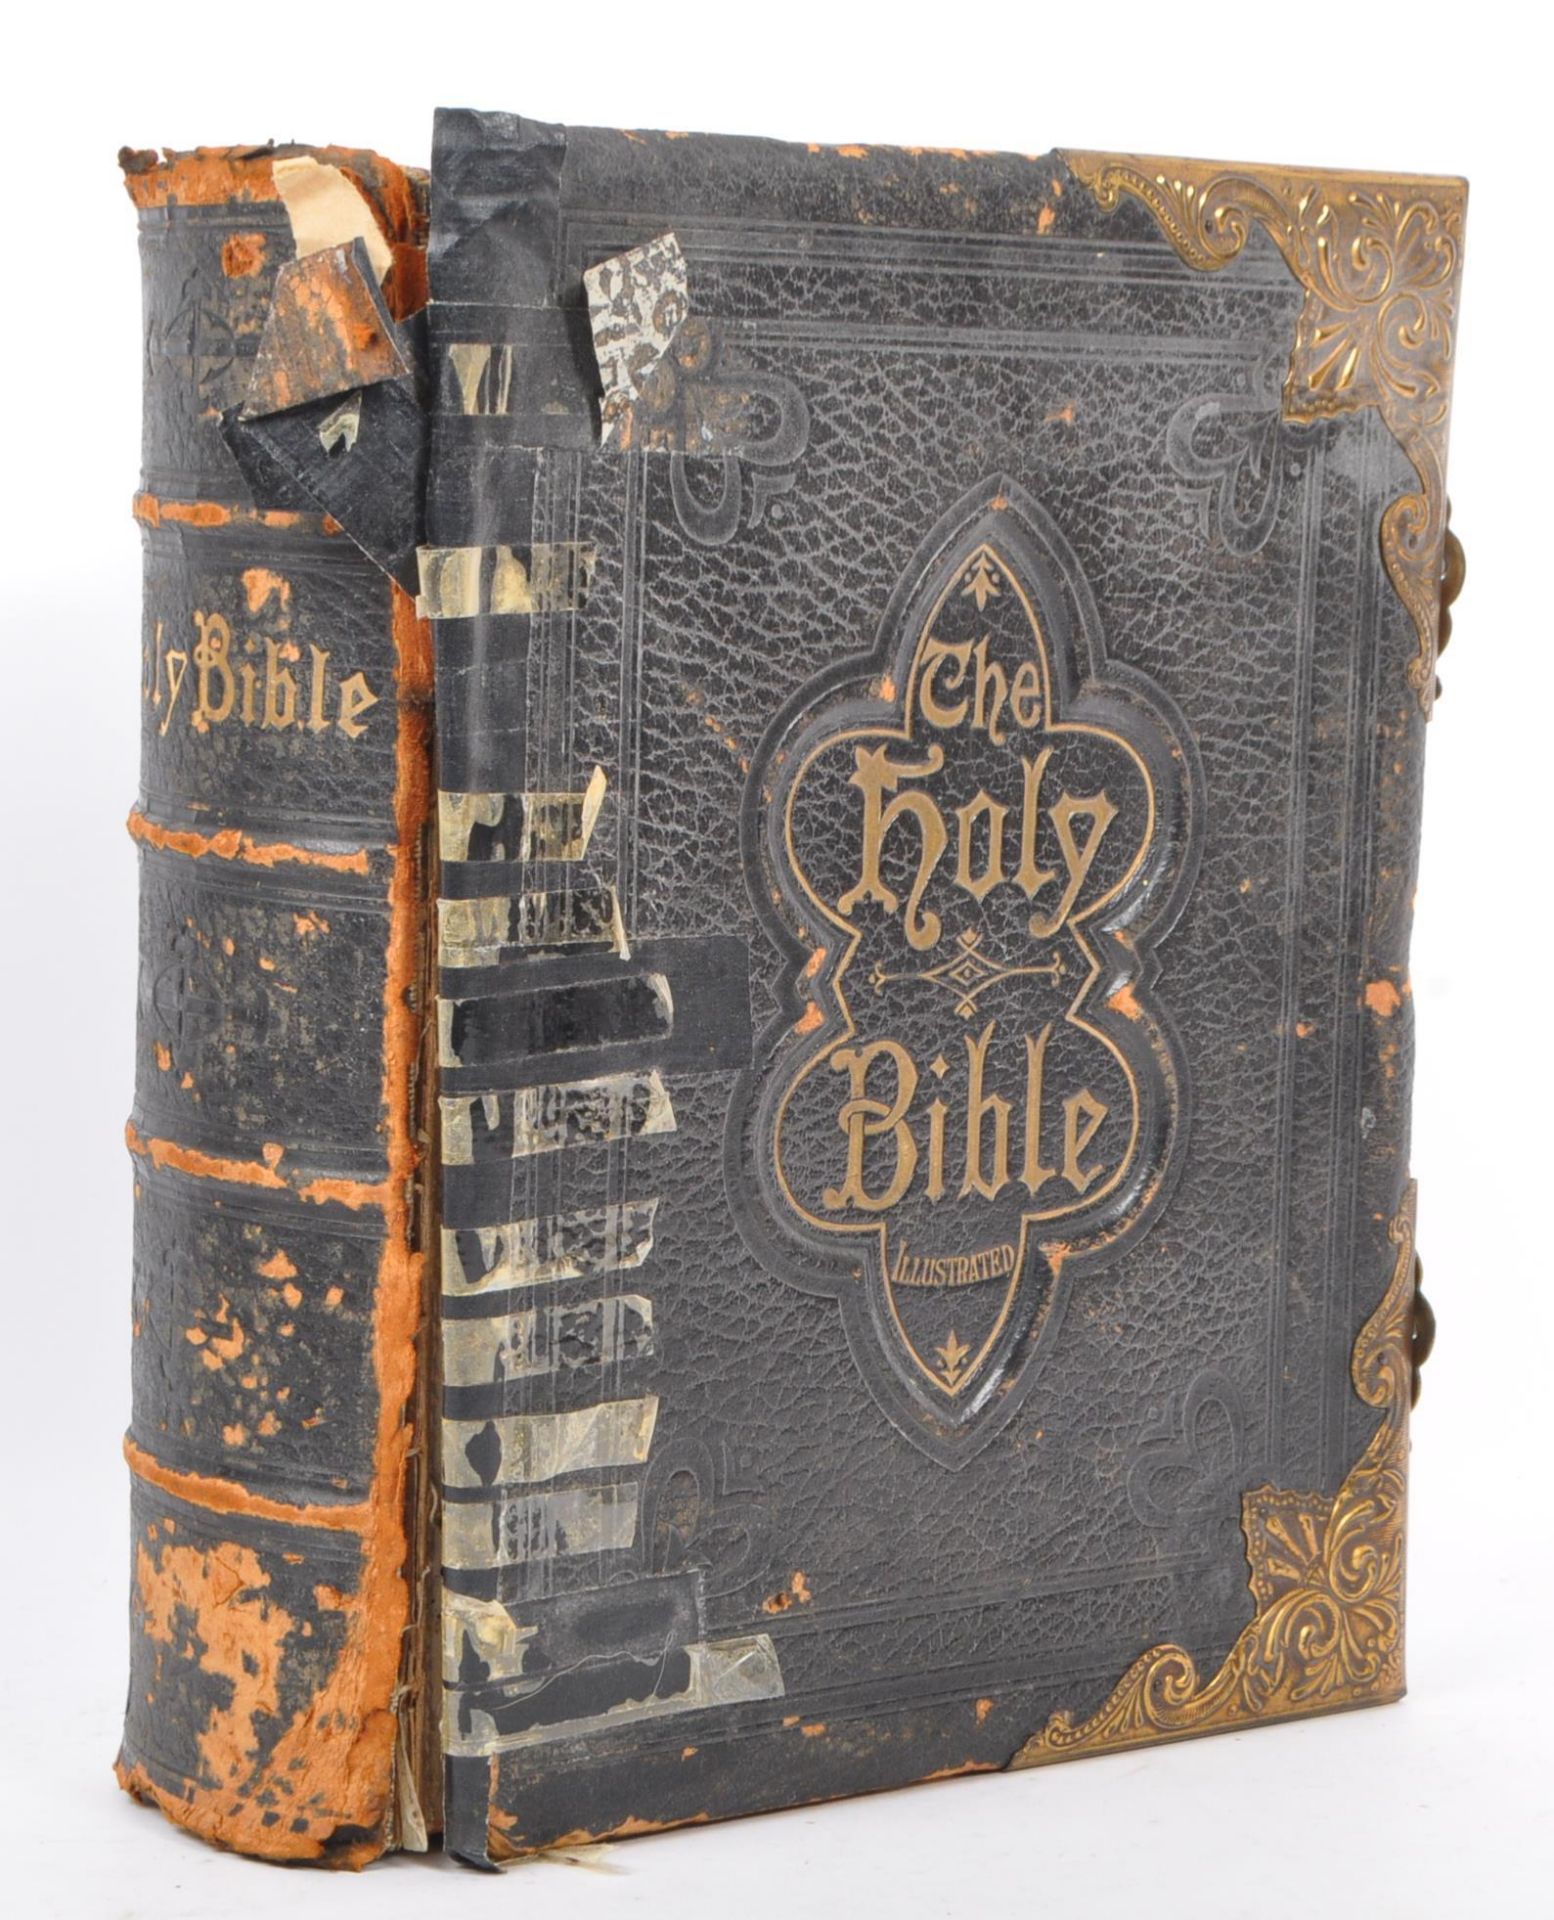 19TH CENTURY THE ILLUSTRATED NATIONAL FAMILY BIBLE